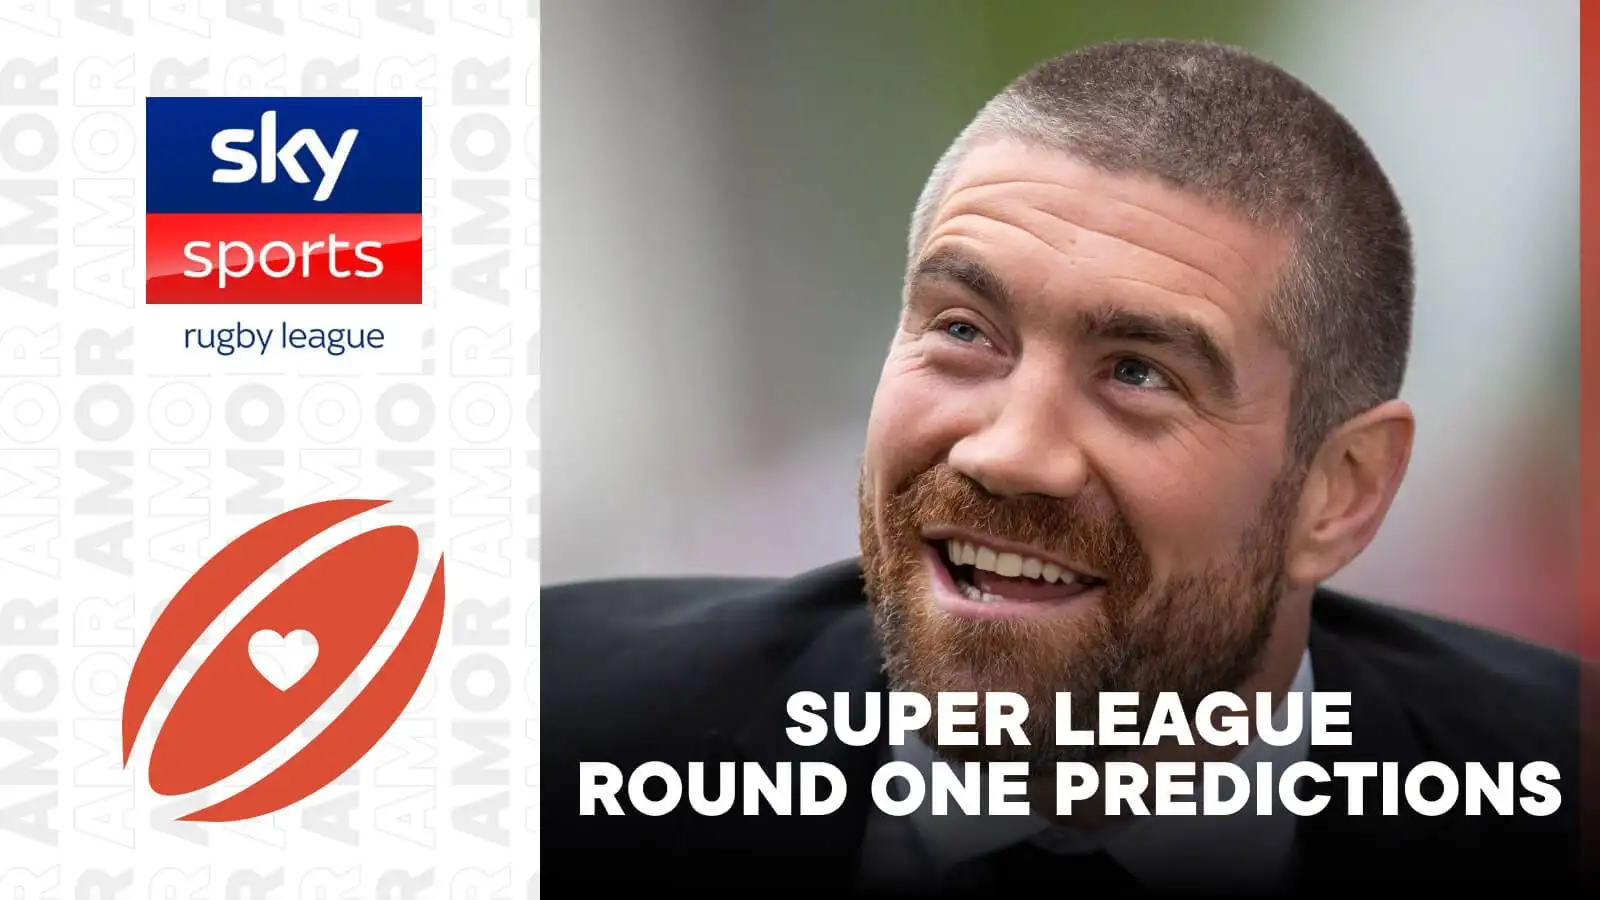 Super League Round One predictions: Love Rugby League versus Sky Sports pundit Kyle Amor